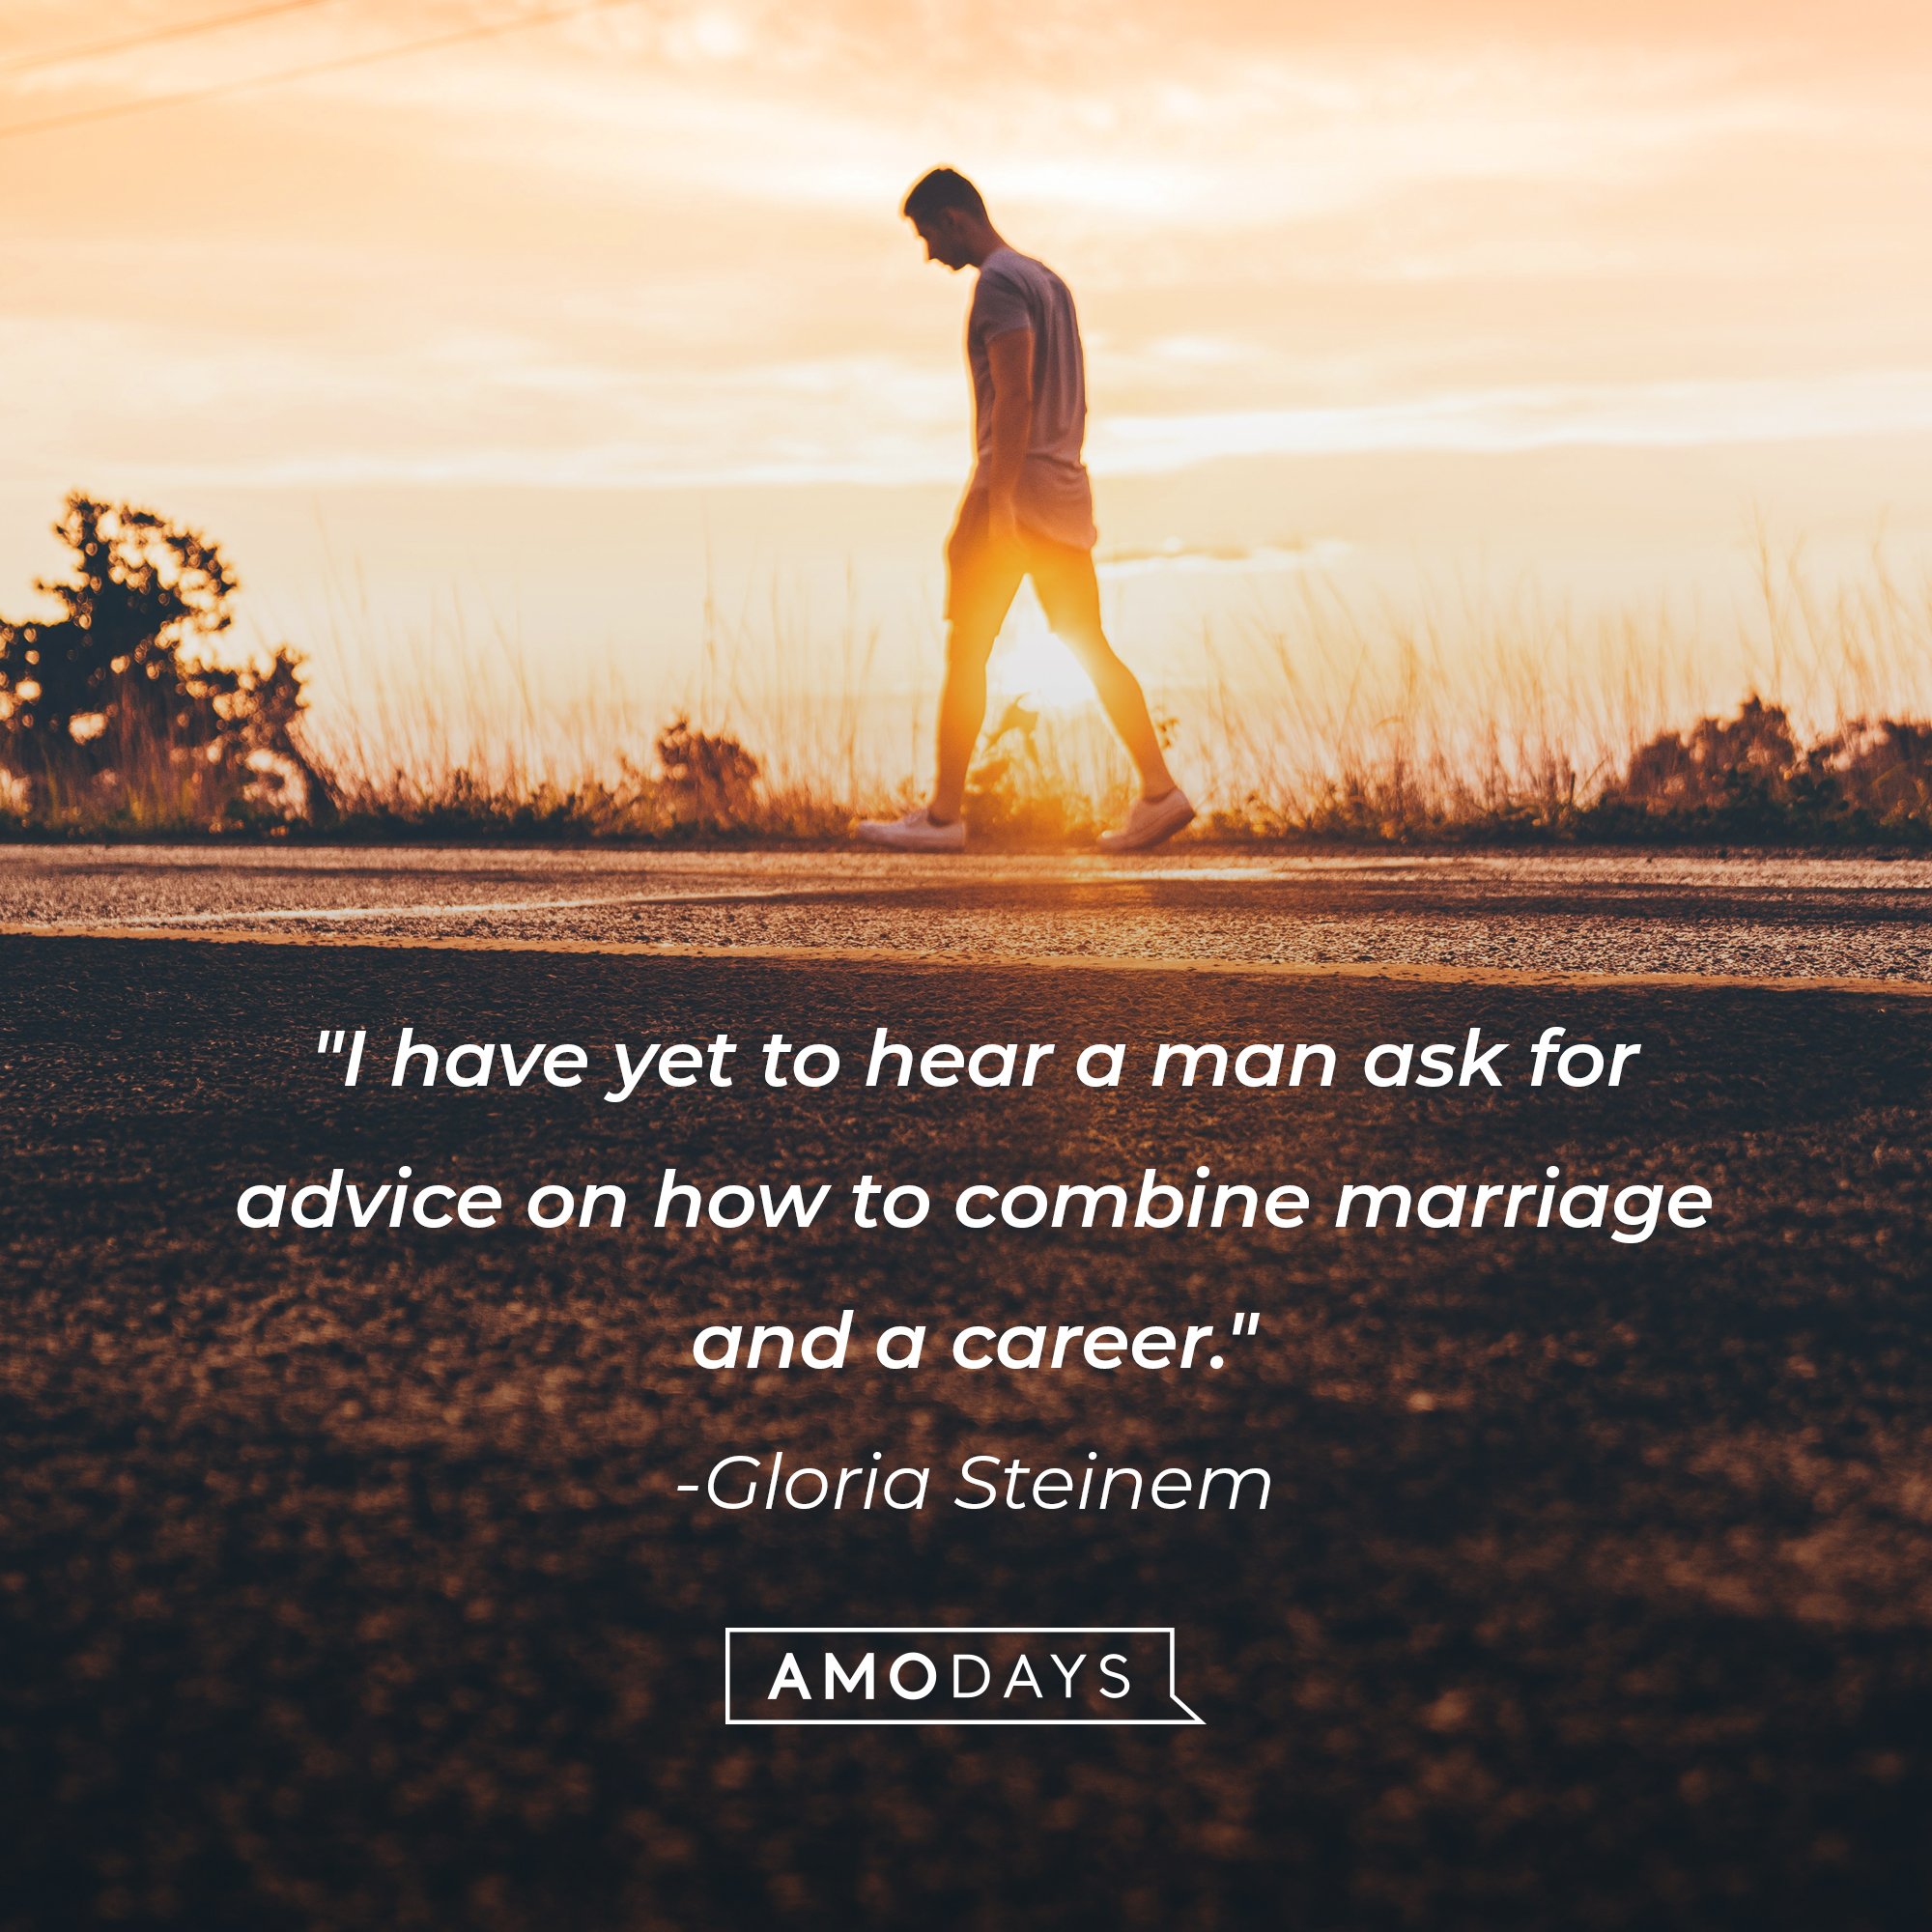 Gloria Steinem's quote: "I have yet to hear a man ask for advice on how to combine marriage and a career." | Image: AmoDays